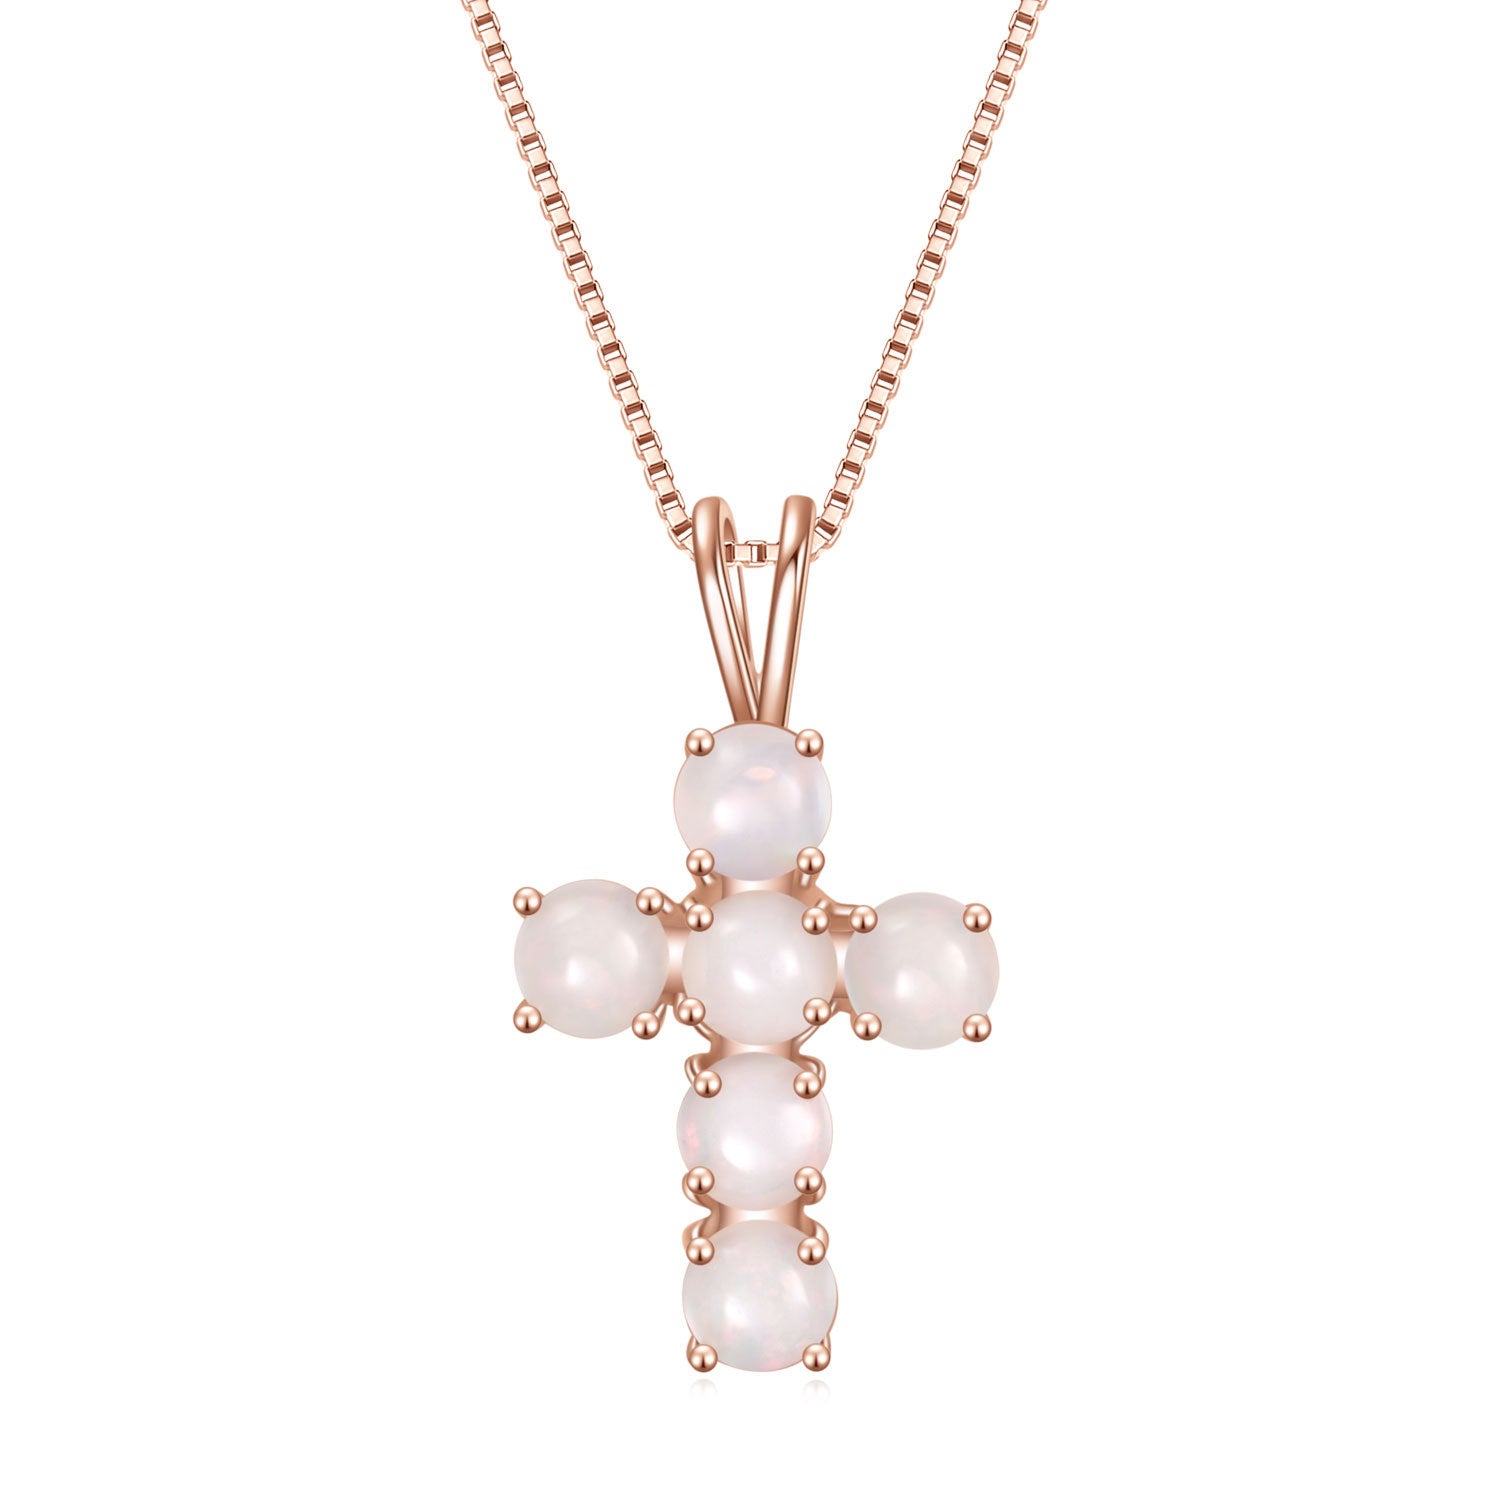 Europen Style Natural Opal Jewelry Cross Pendant Plated 18K Rose Gold Silver Necklace for Women